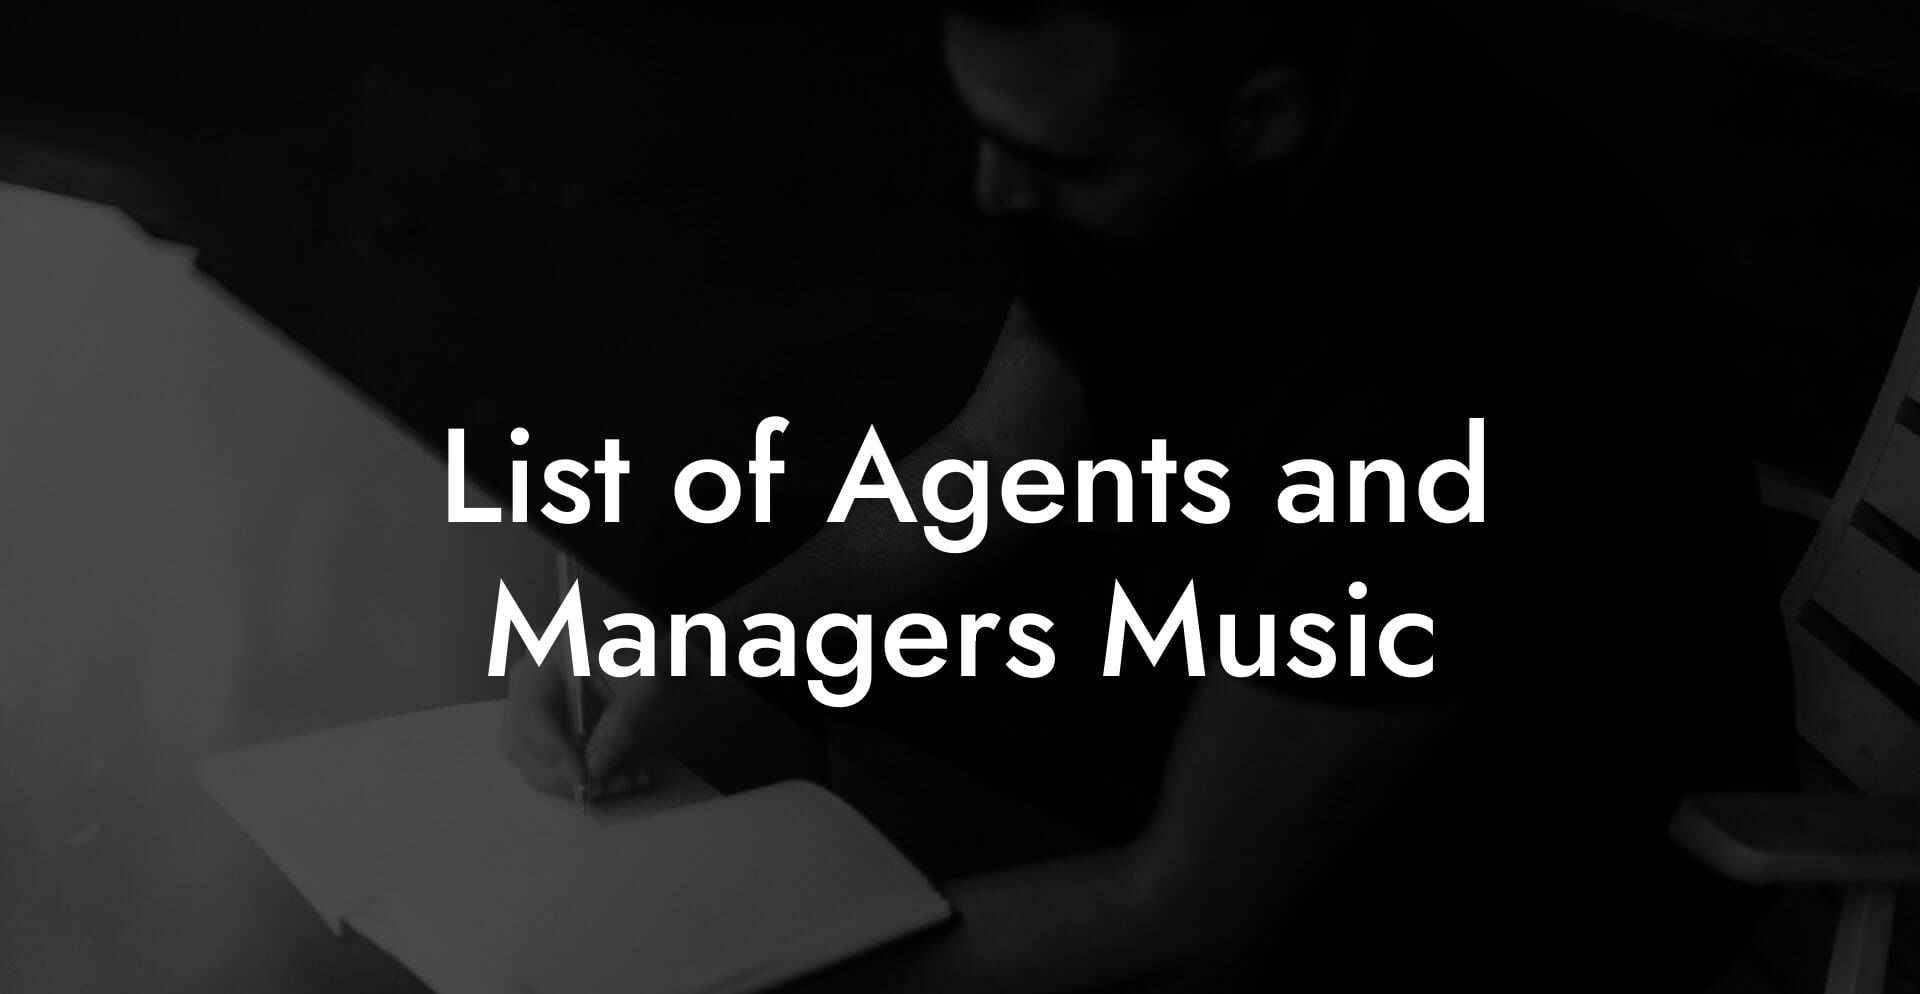 List of Agents and Managers Music